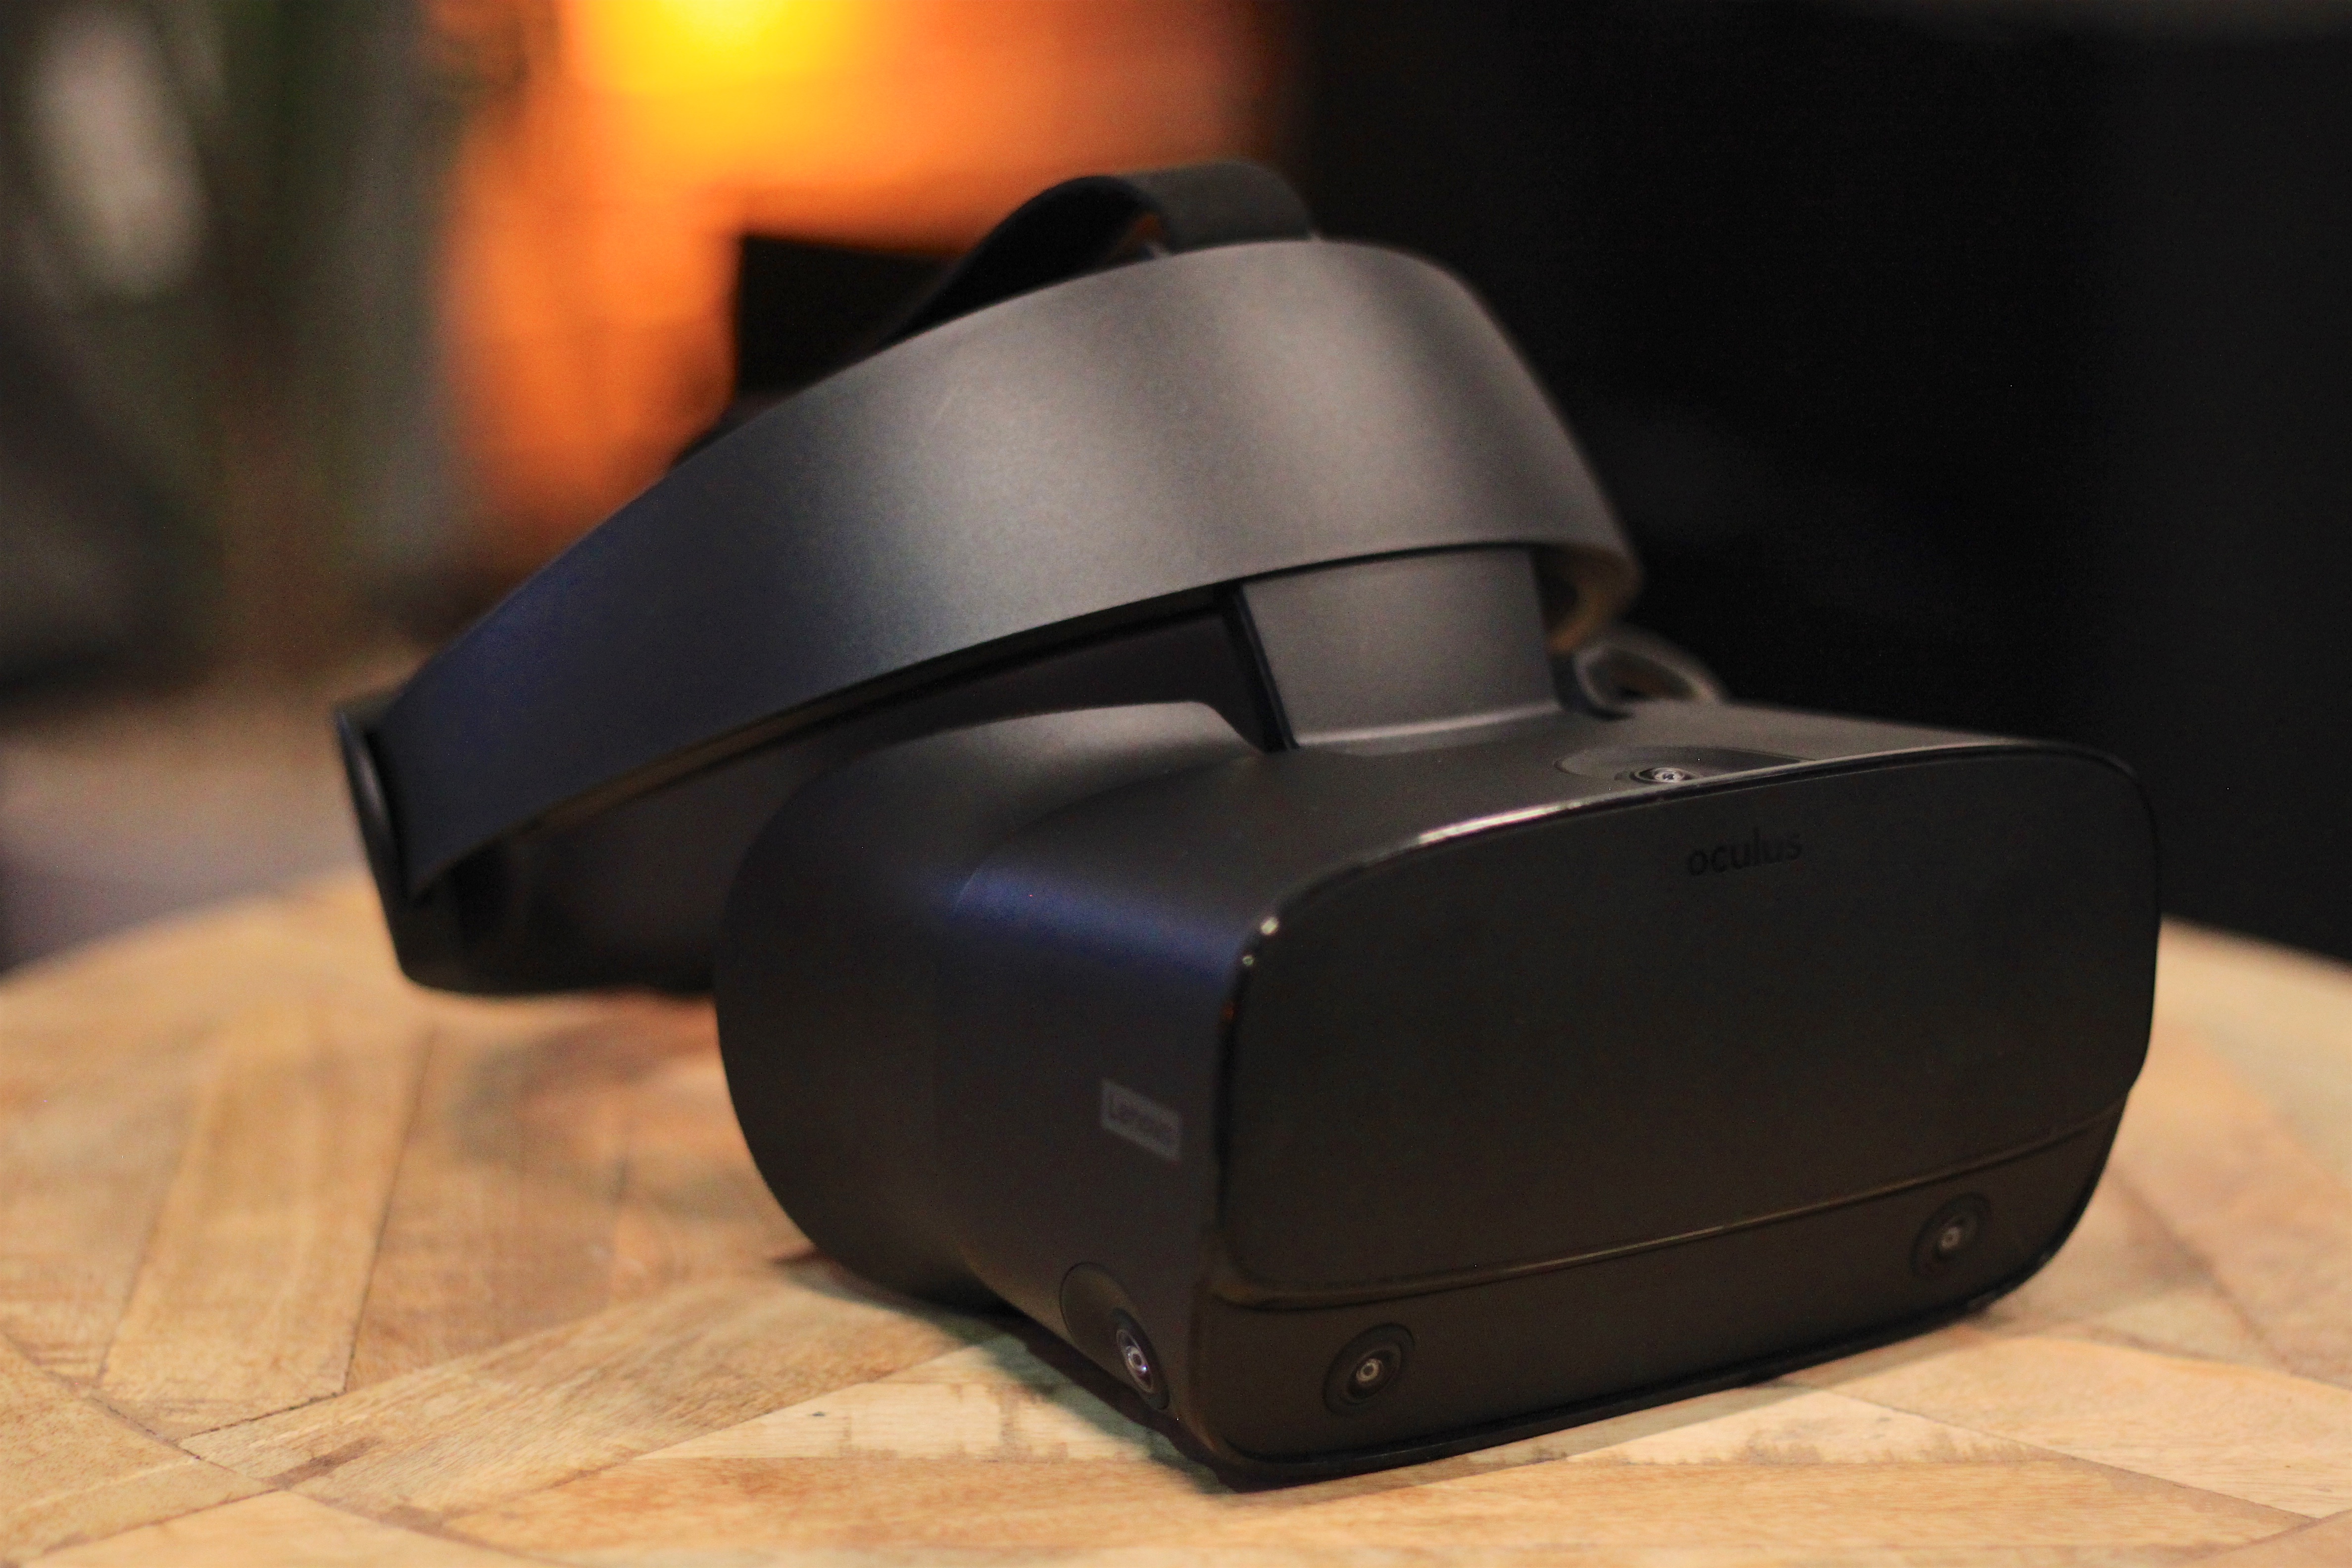 Hands-on with the new $399 Oculus Rift S: More pixels, zero 